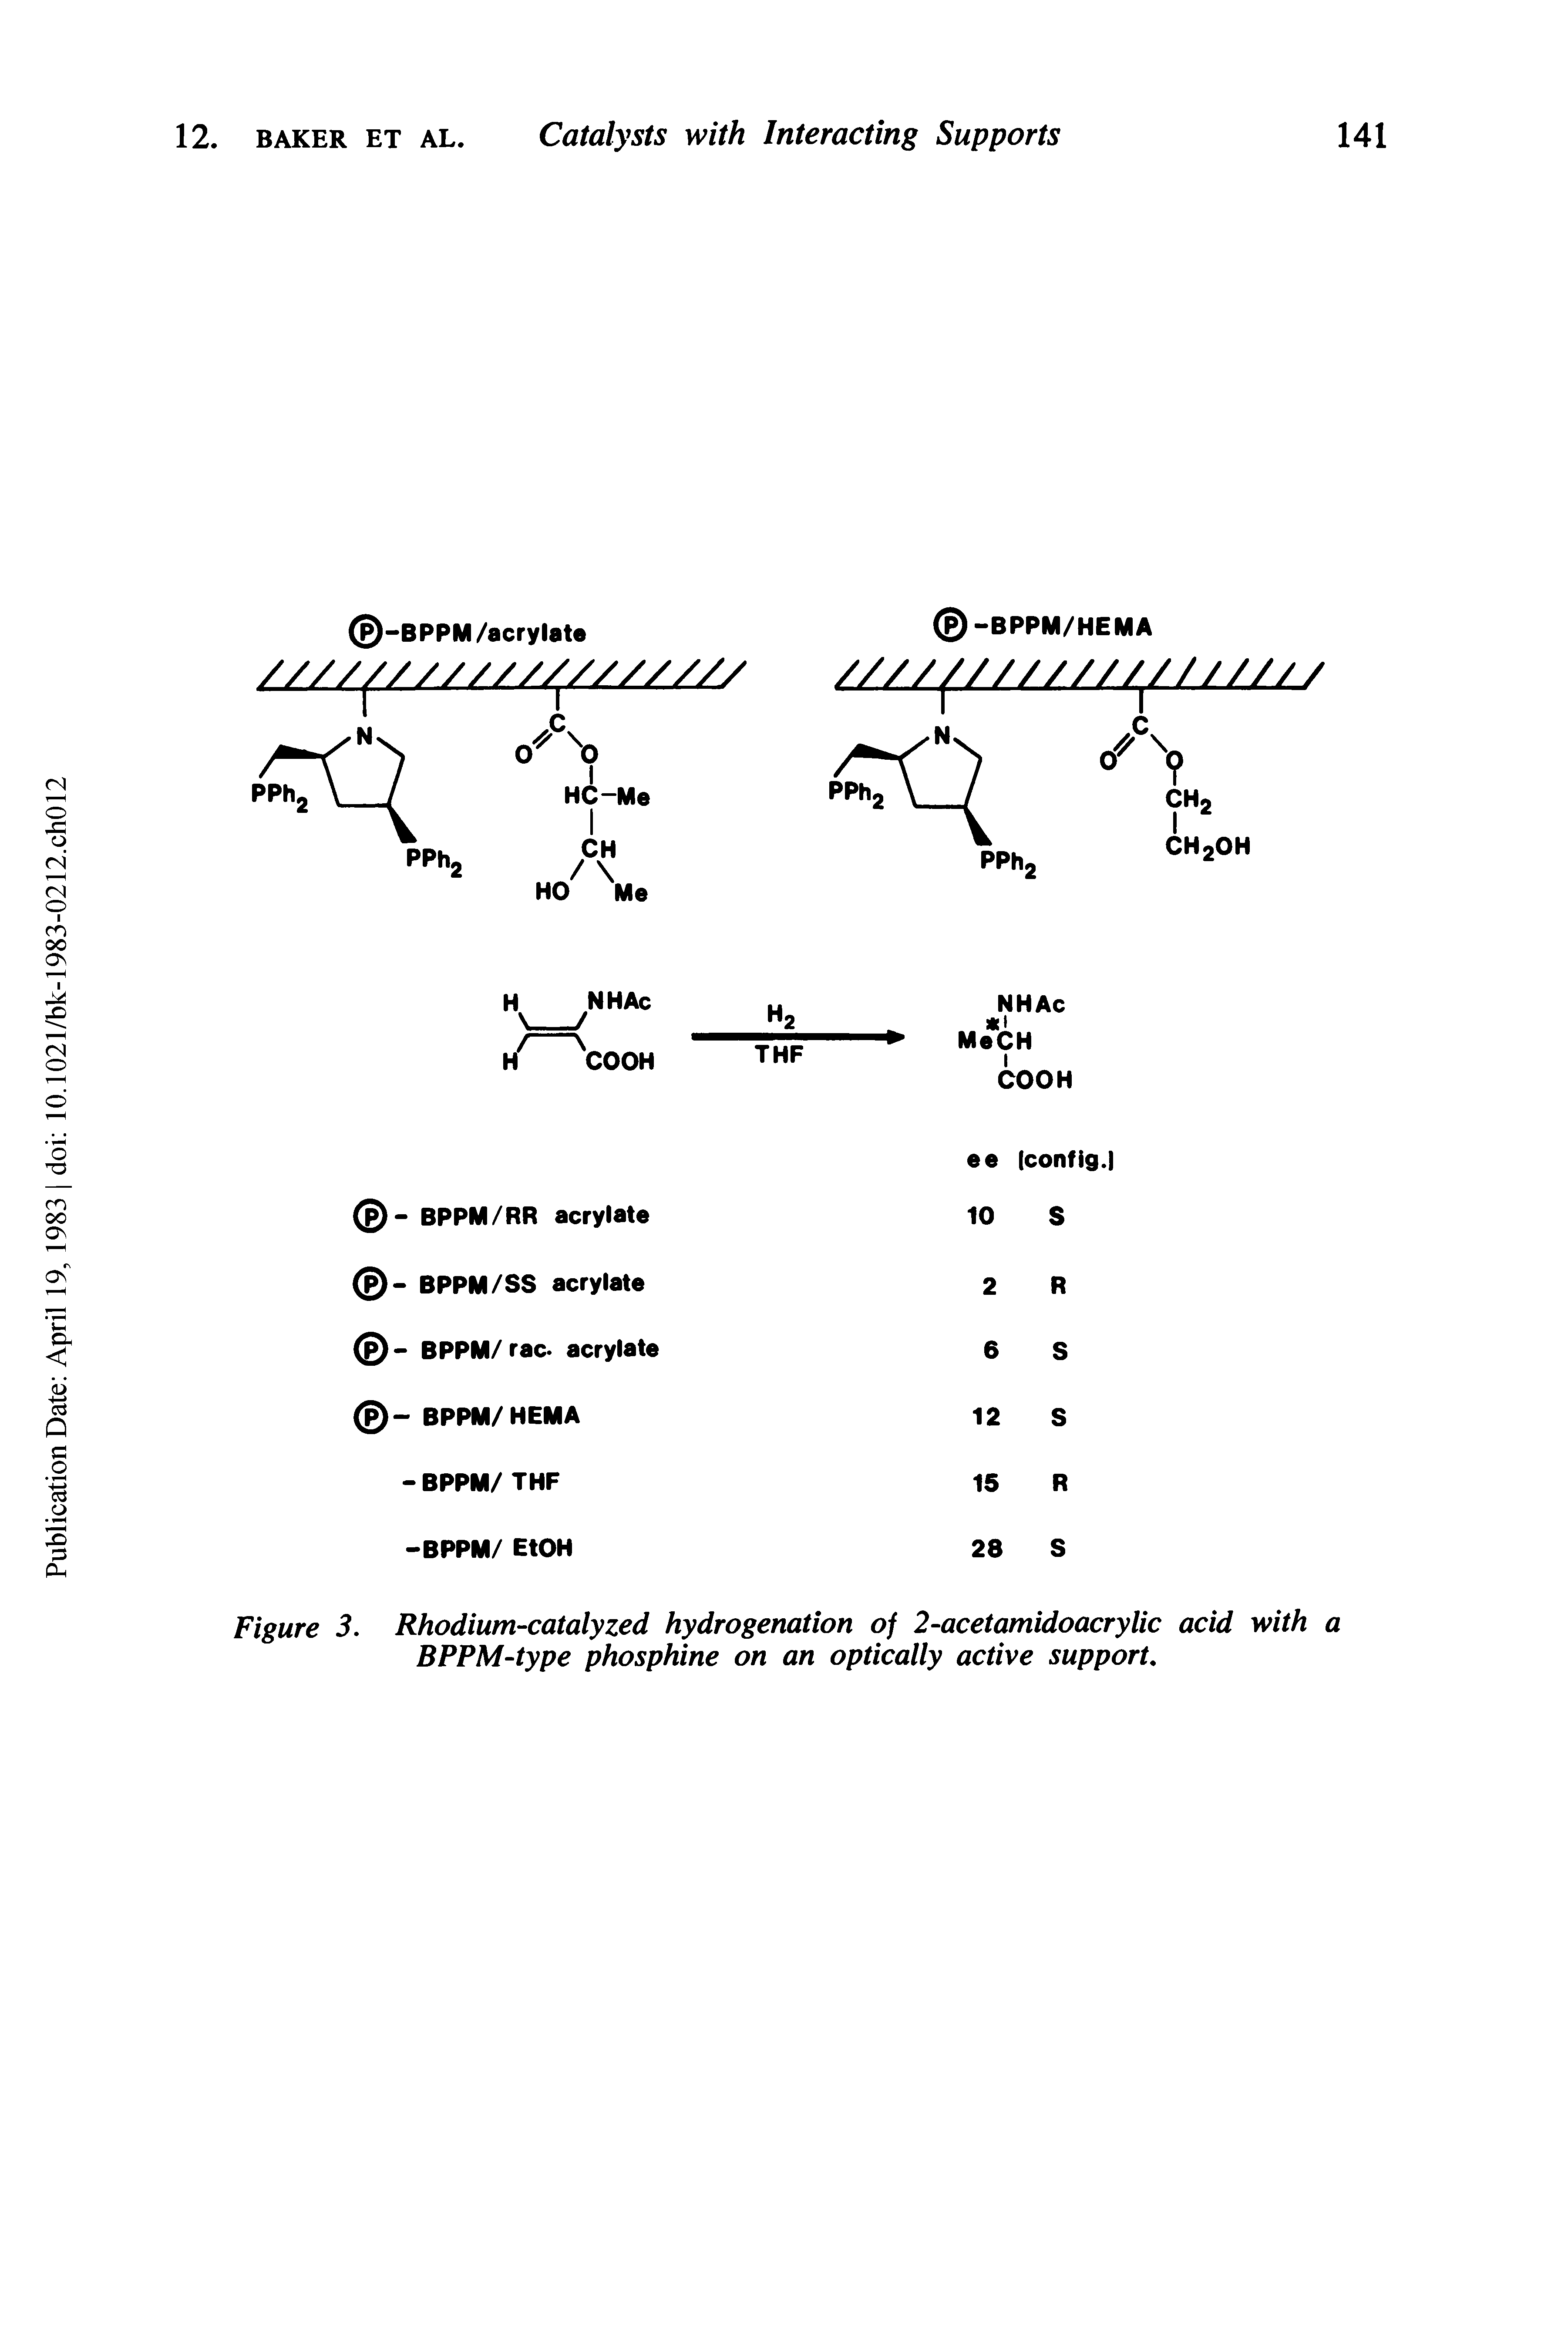 Figure 3. Rhodium-catalyzed hydrogenation of 2-acetamidoacrylic acid with a BPPM-type phosphine on an optically active support.